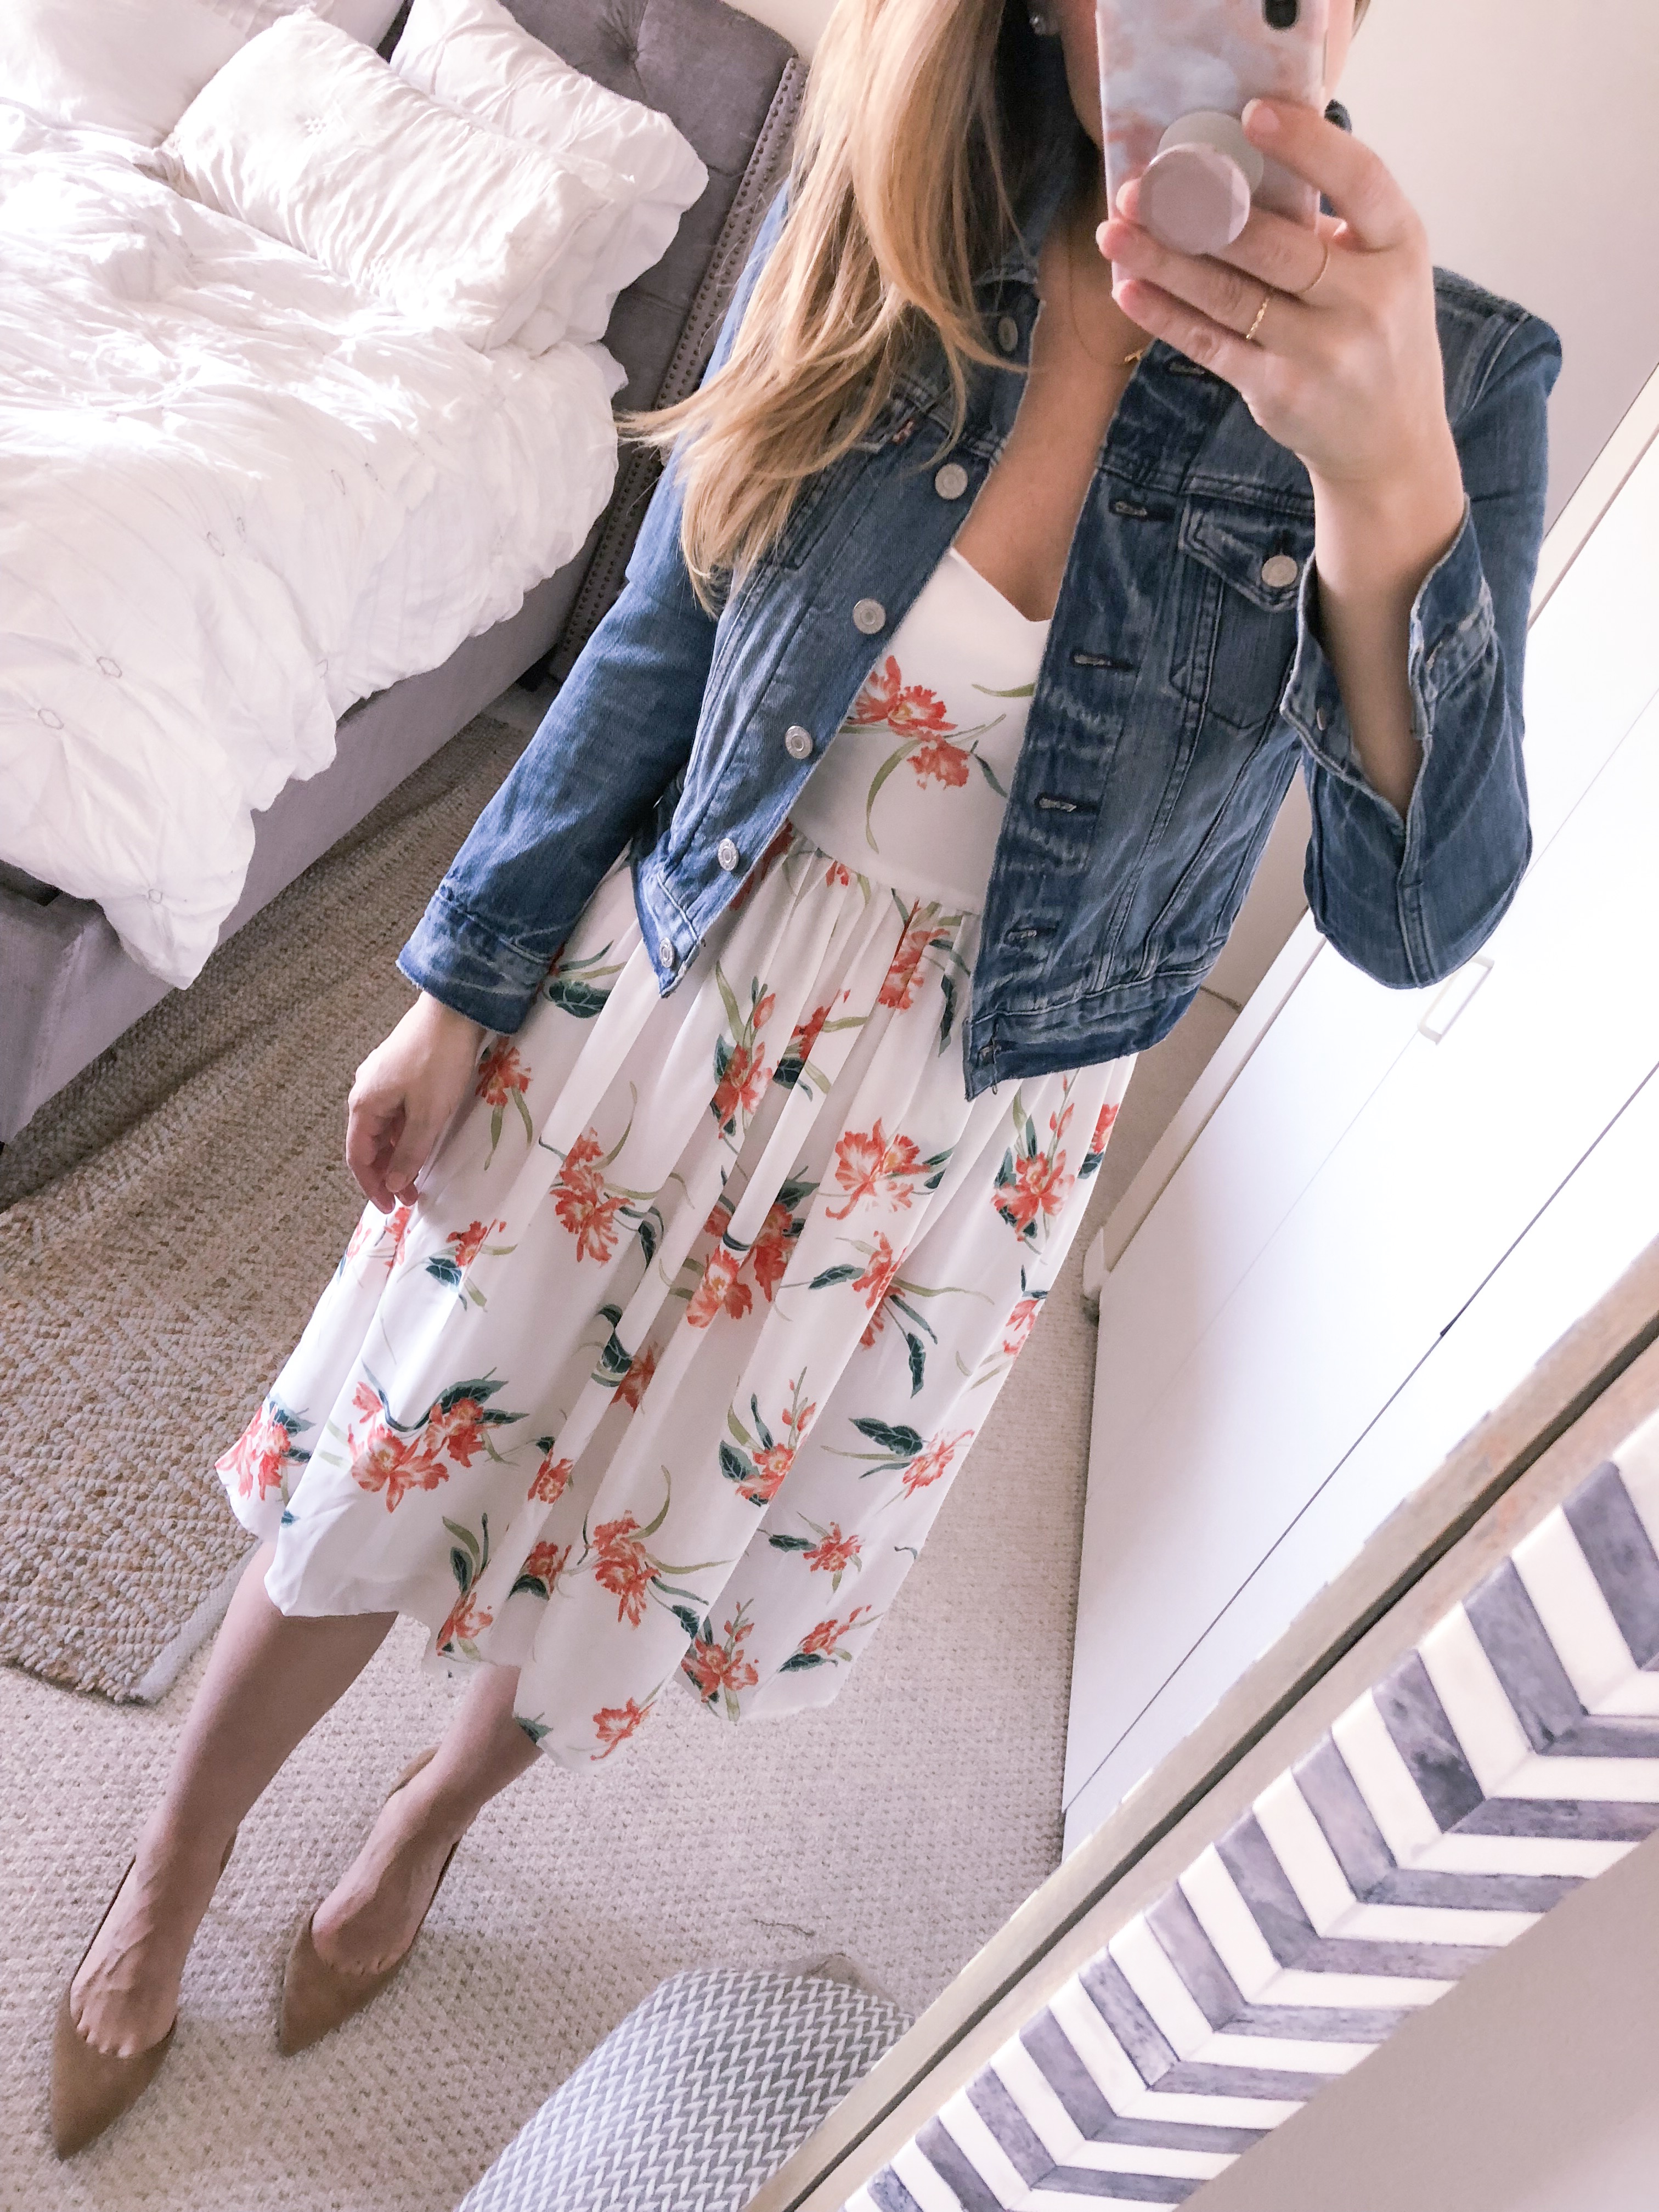 OOTD 3.21.18: White Floral Dress and Jean Jacket